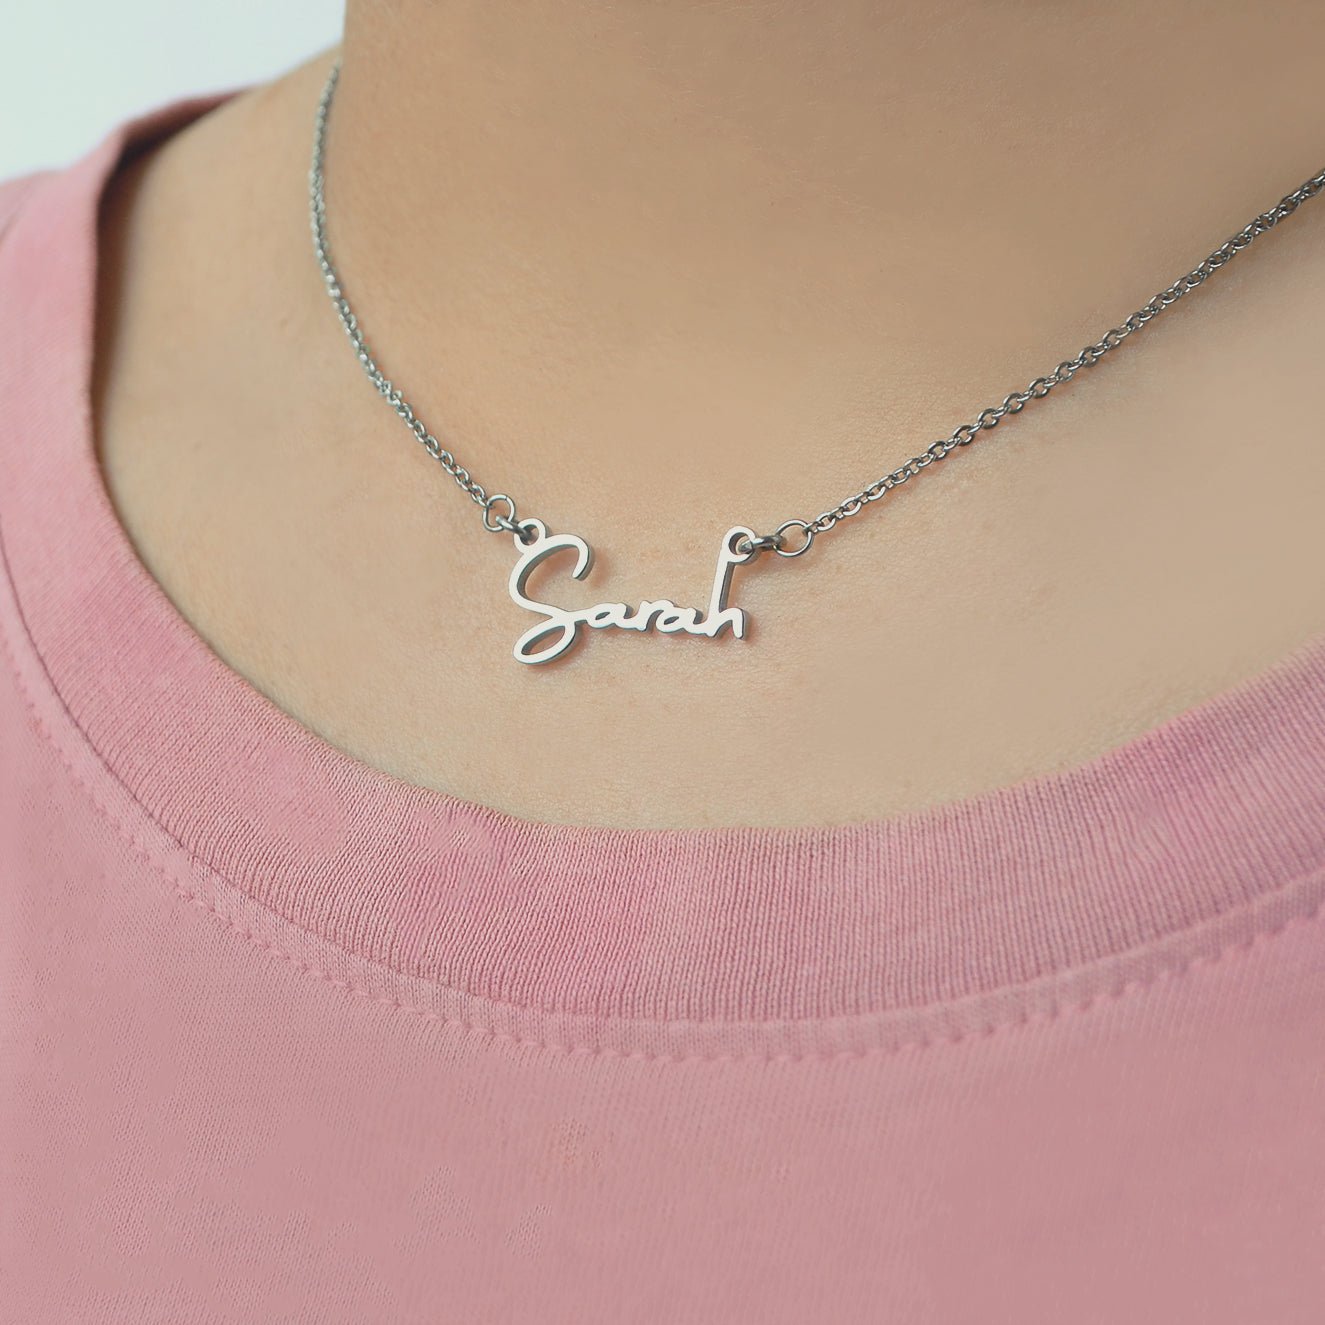 Personalised Signature Font Name Necklace with Birthstone Options - Name Necklaces by Belle Fever